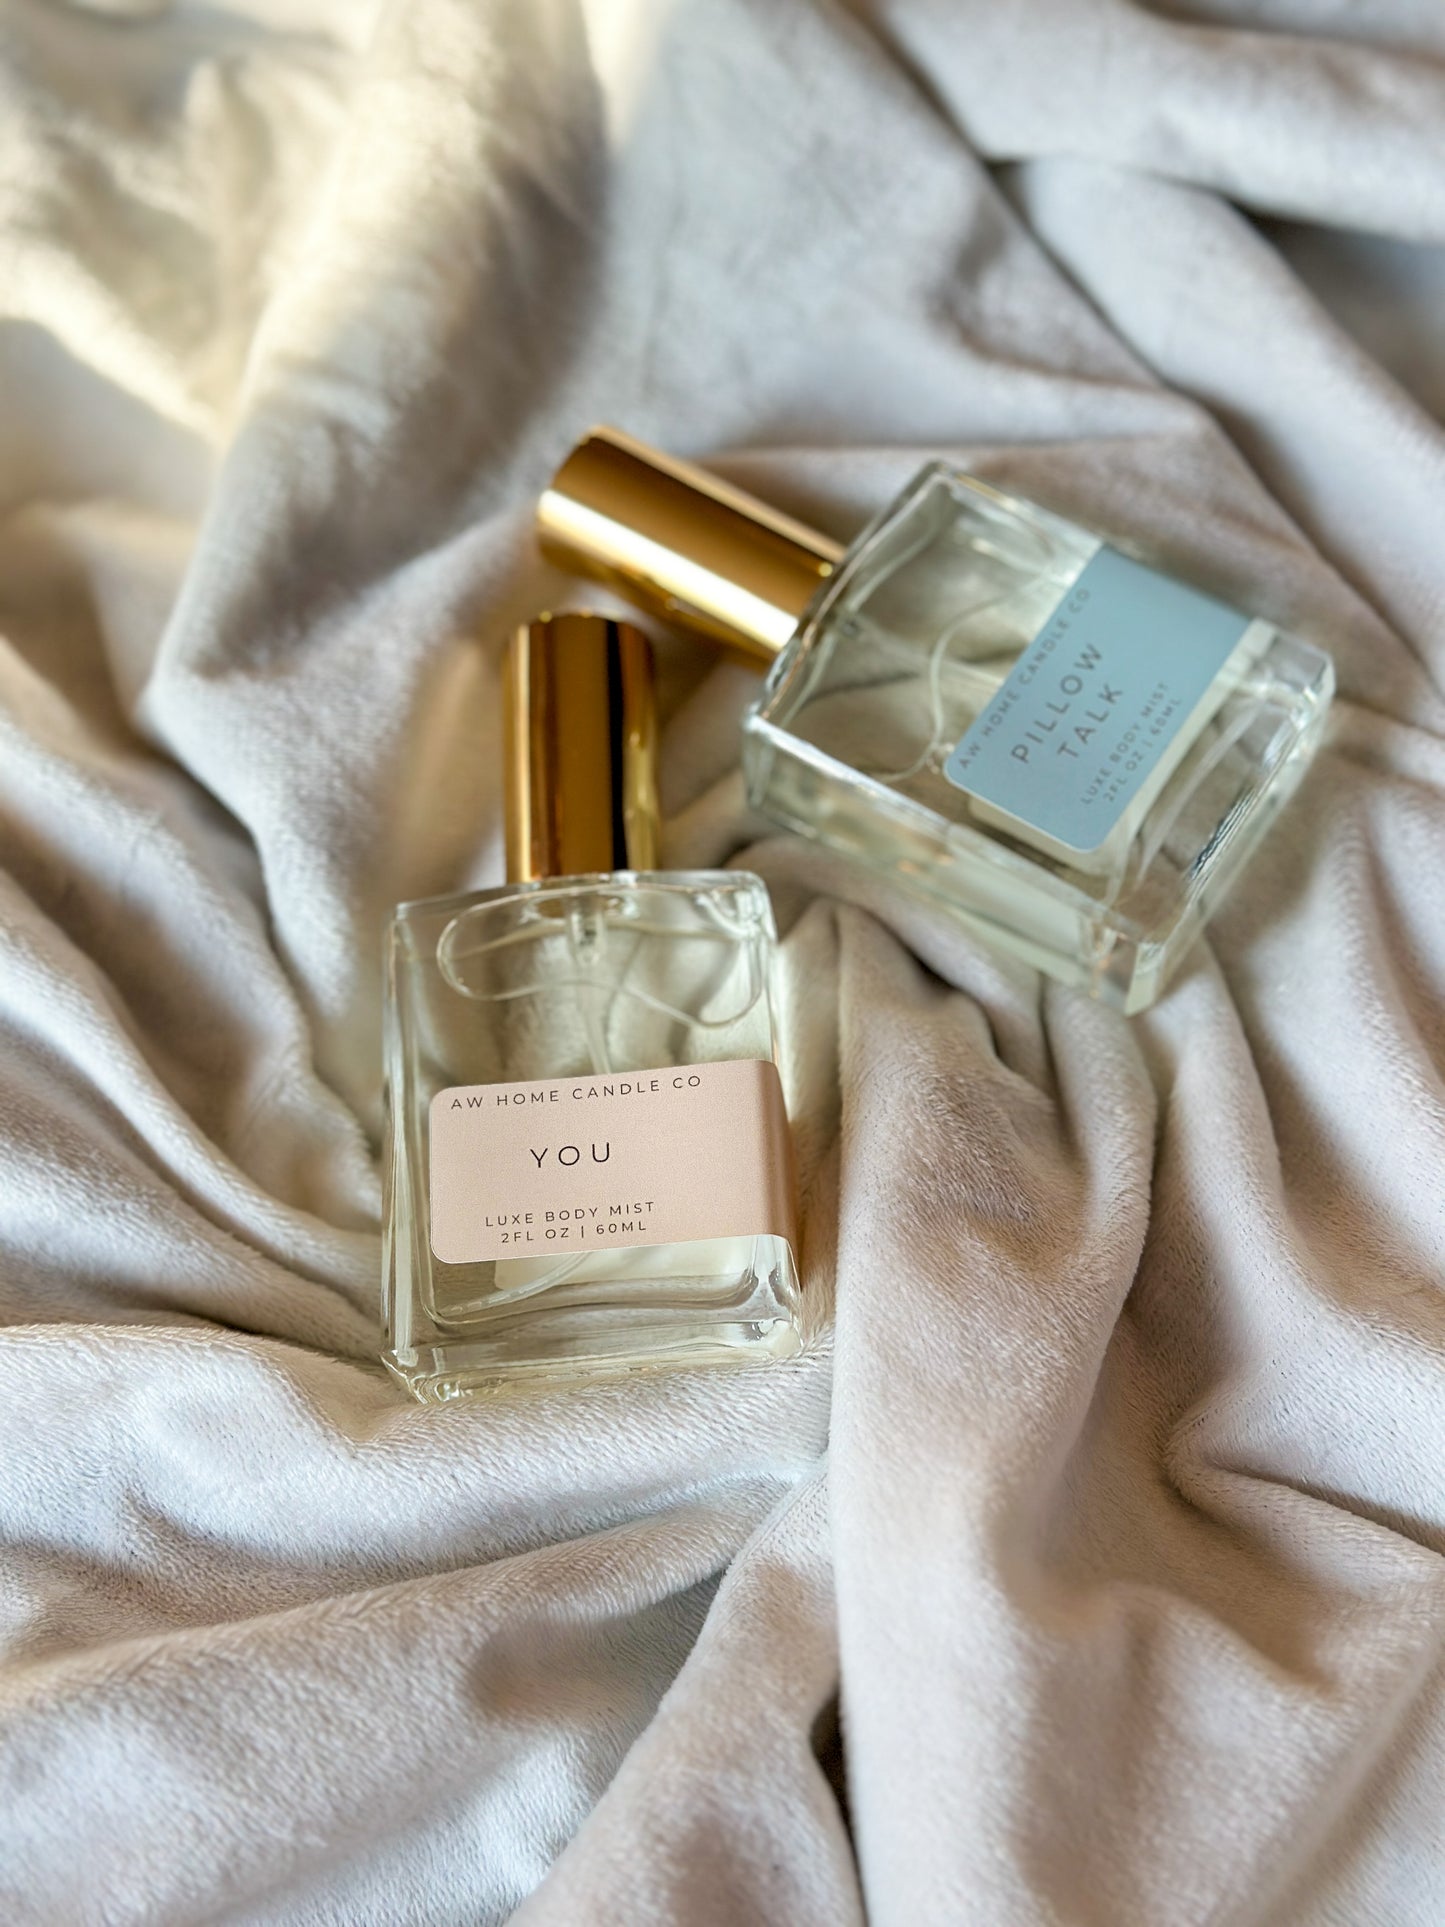 YOU Luxe Body Mist | Iris and musk and cashmere